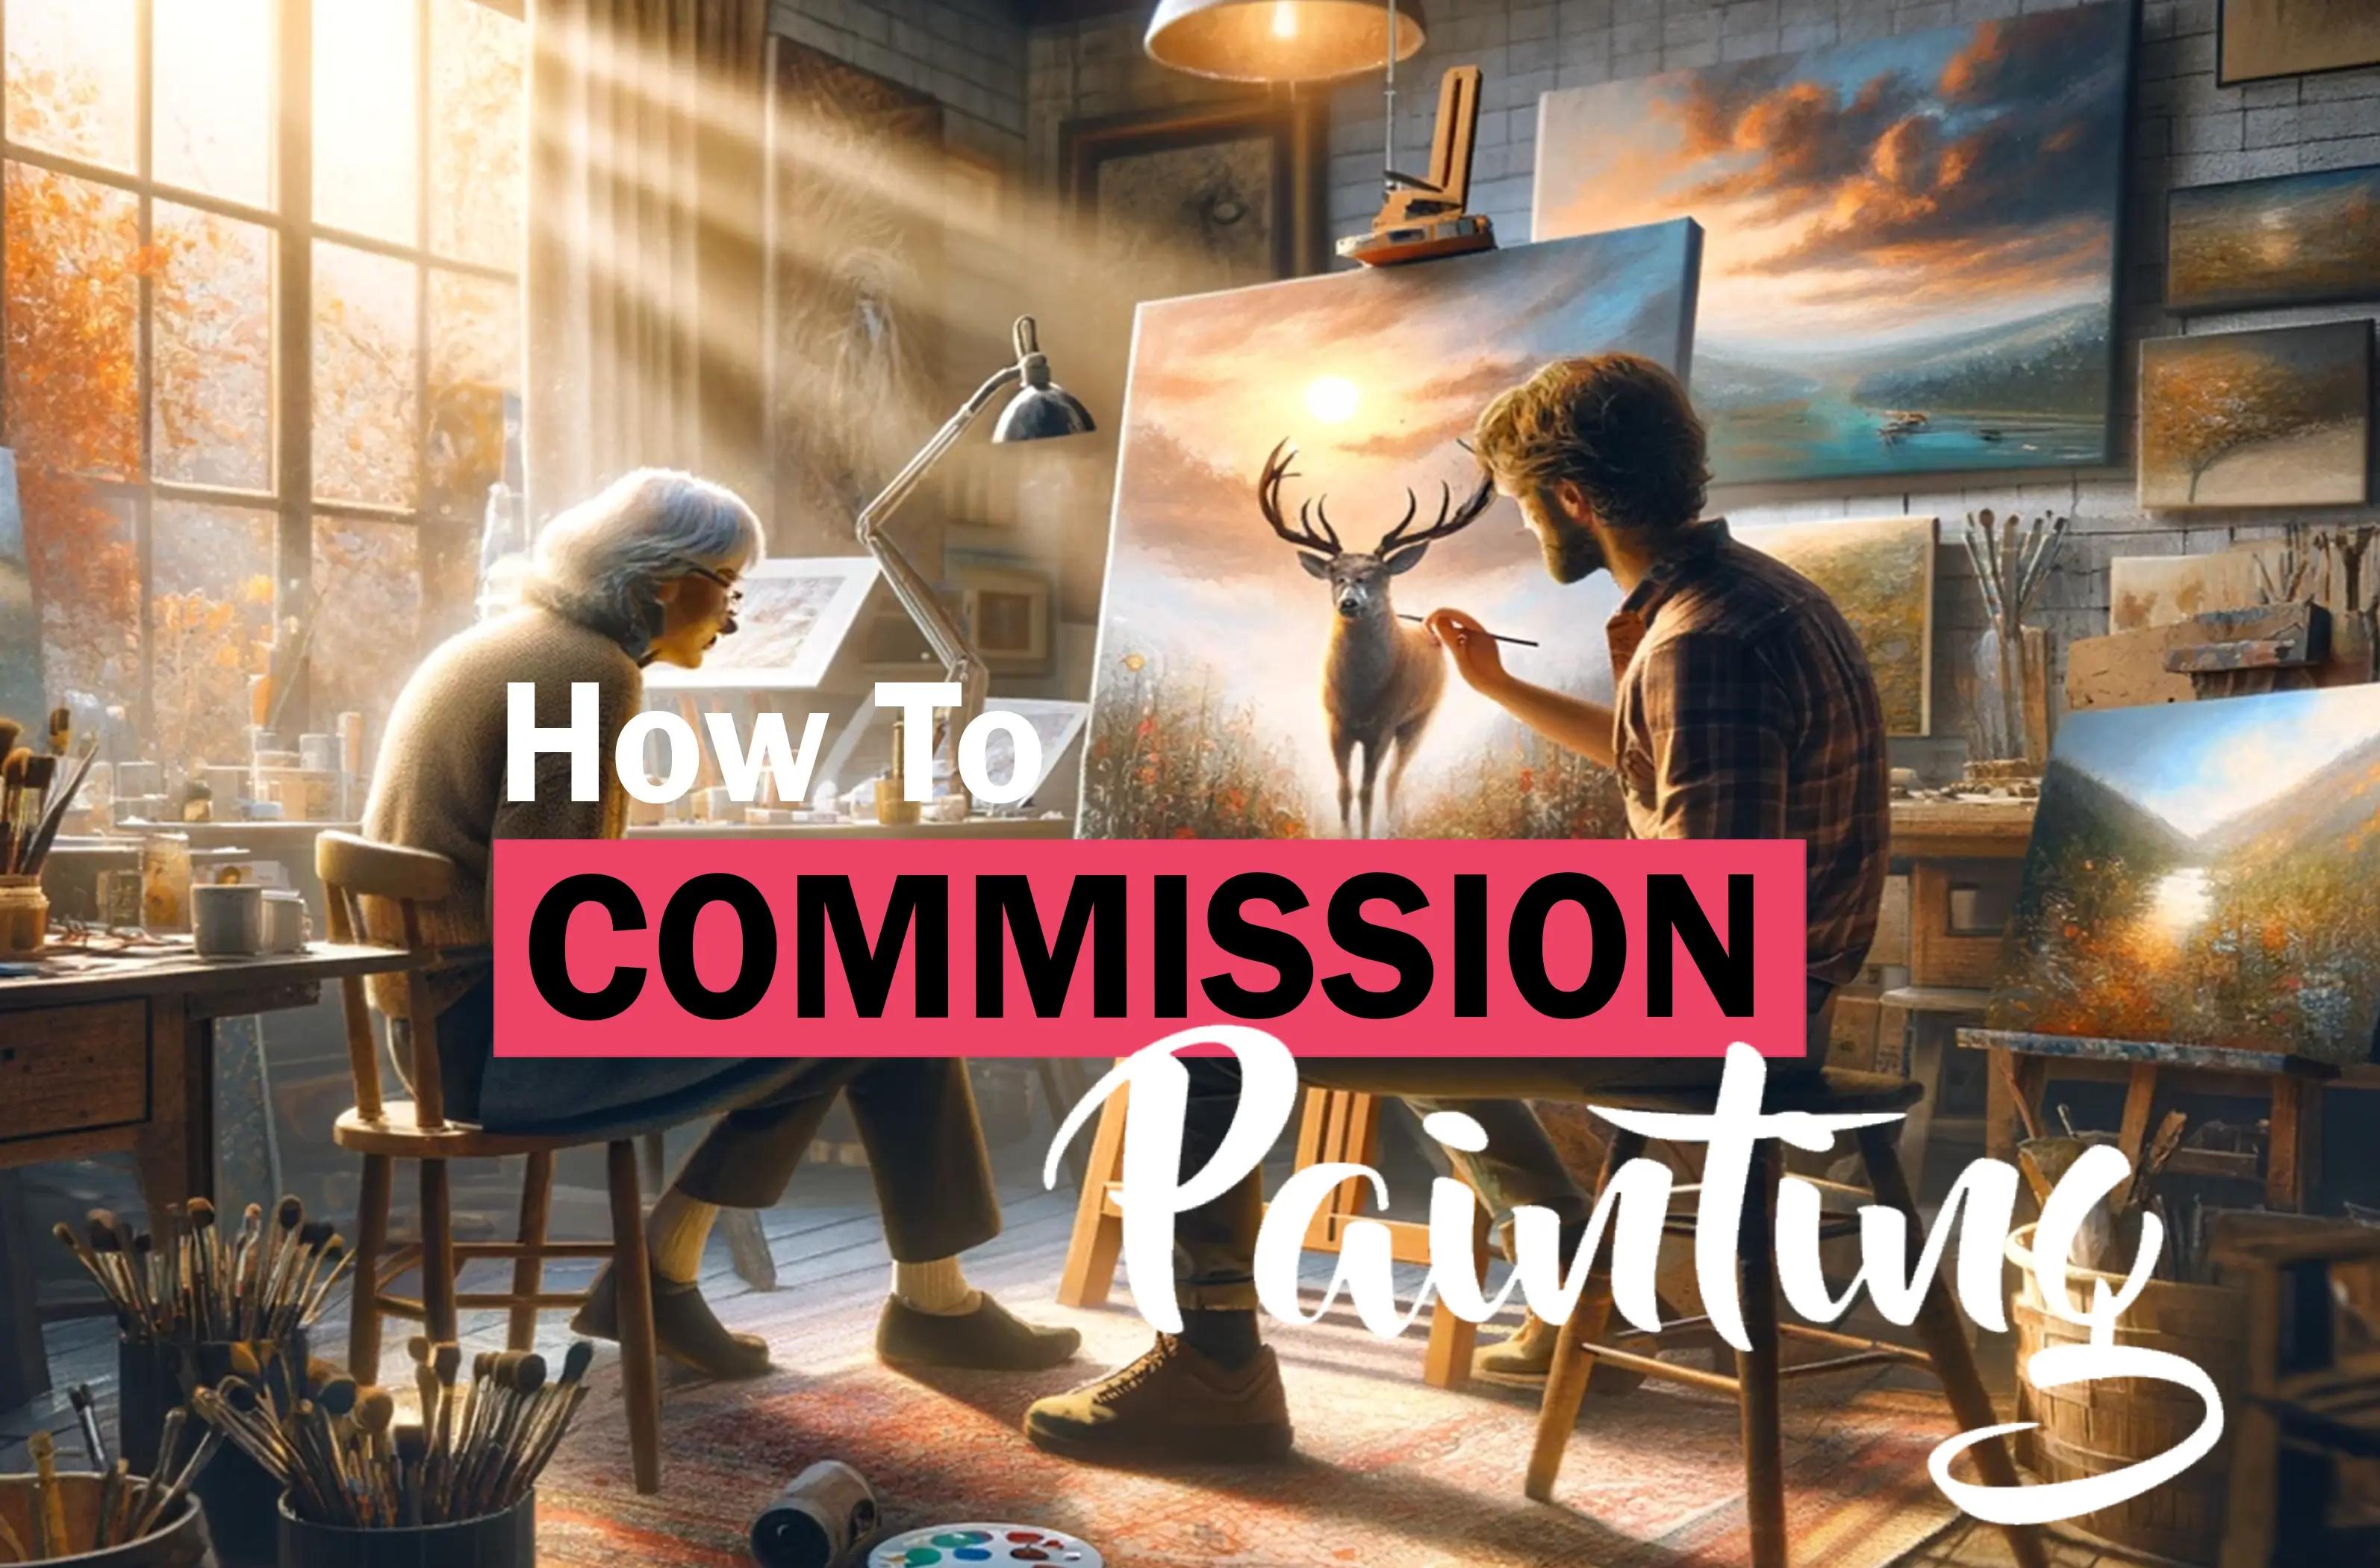 How to Commission a Painting - The Complete Process